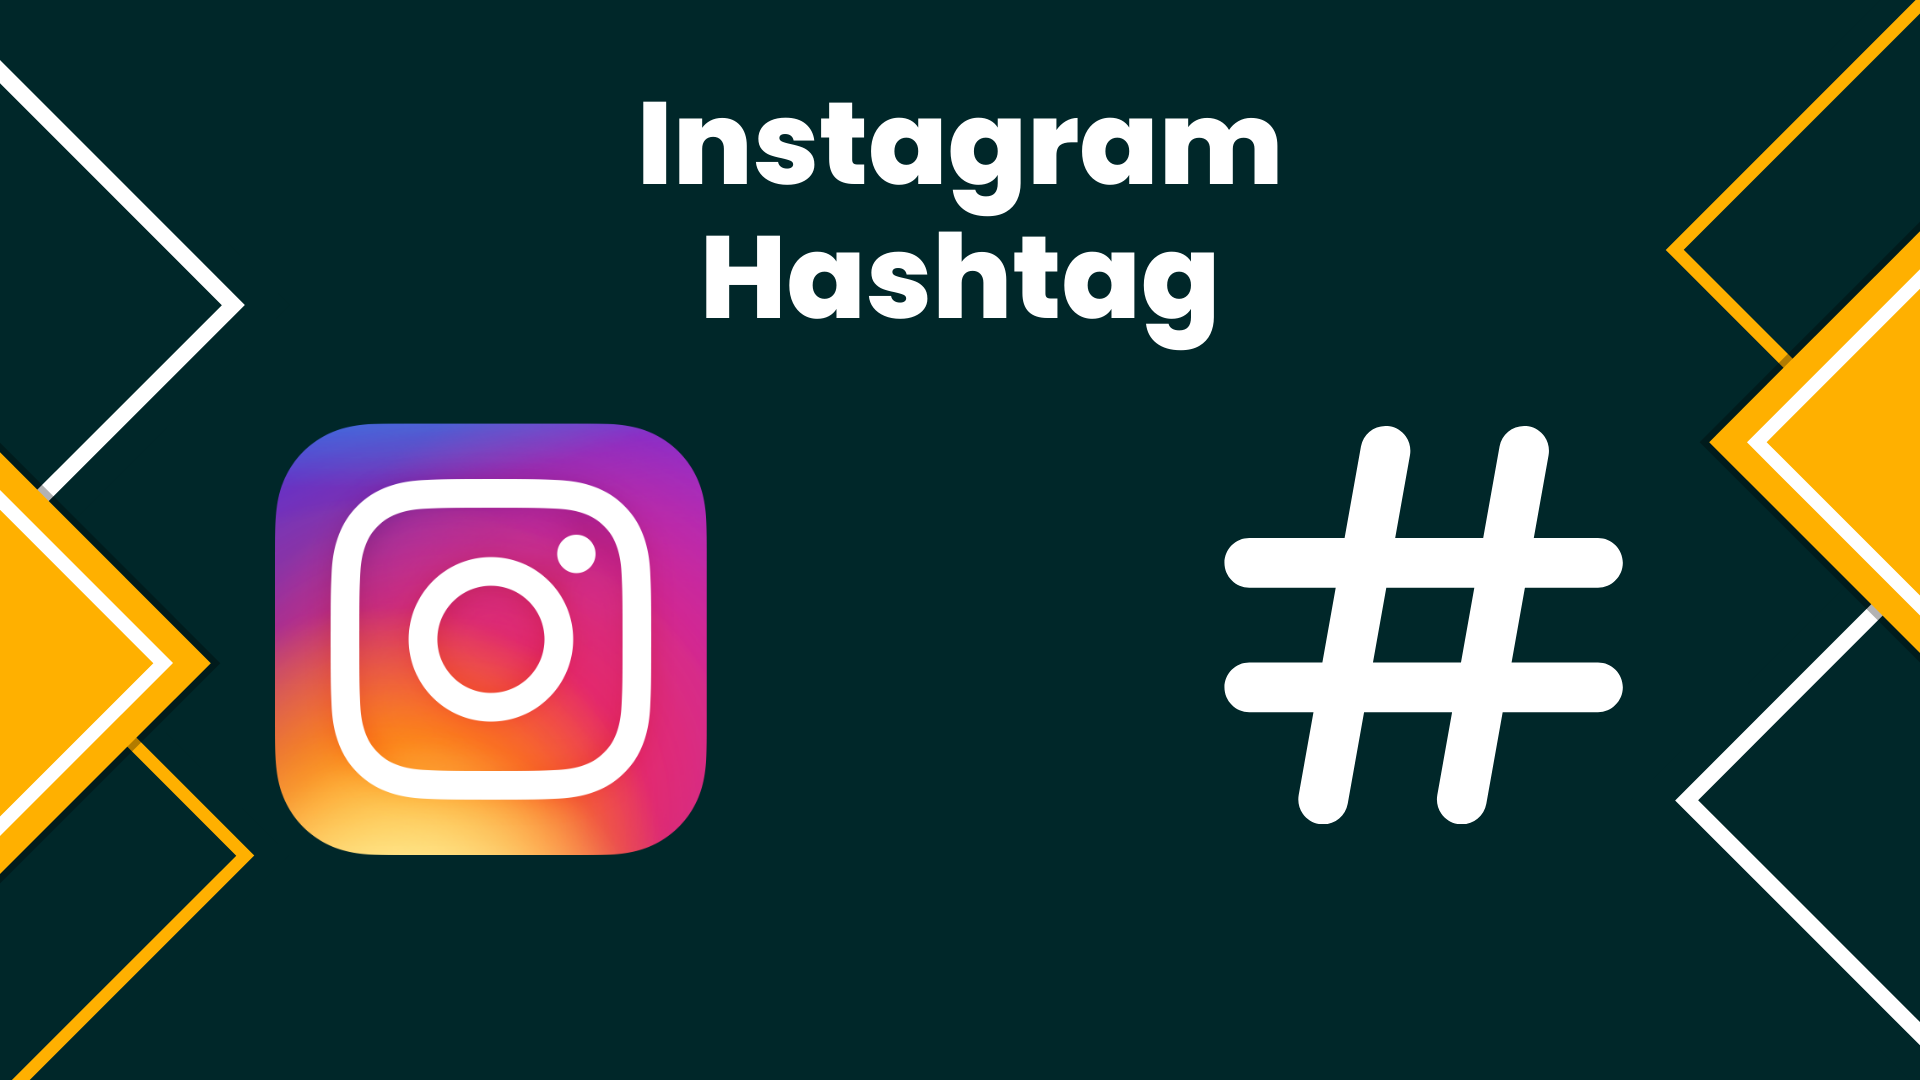 How To Find Instagram Hashtags To Viral A Post